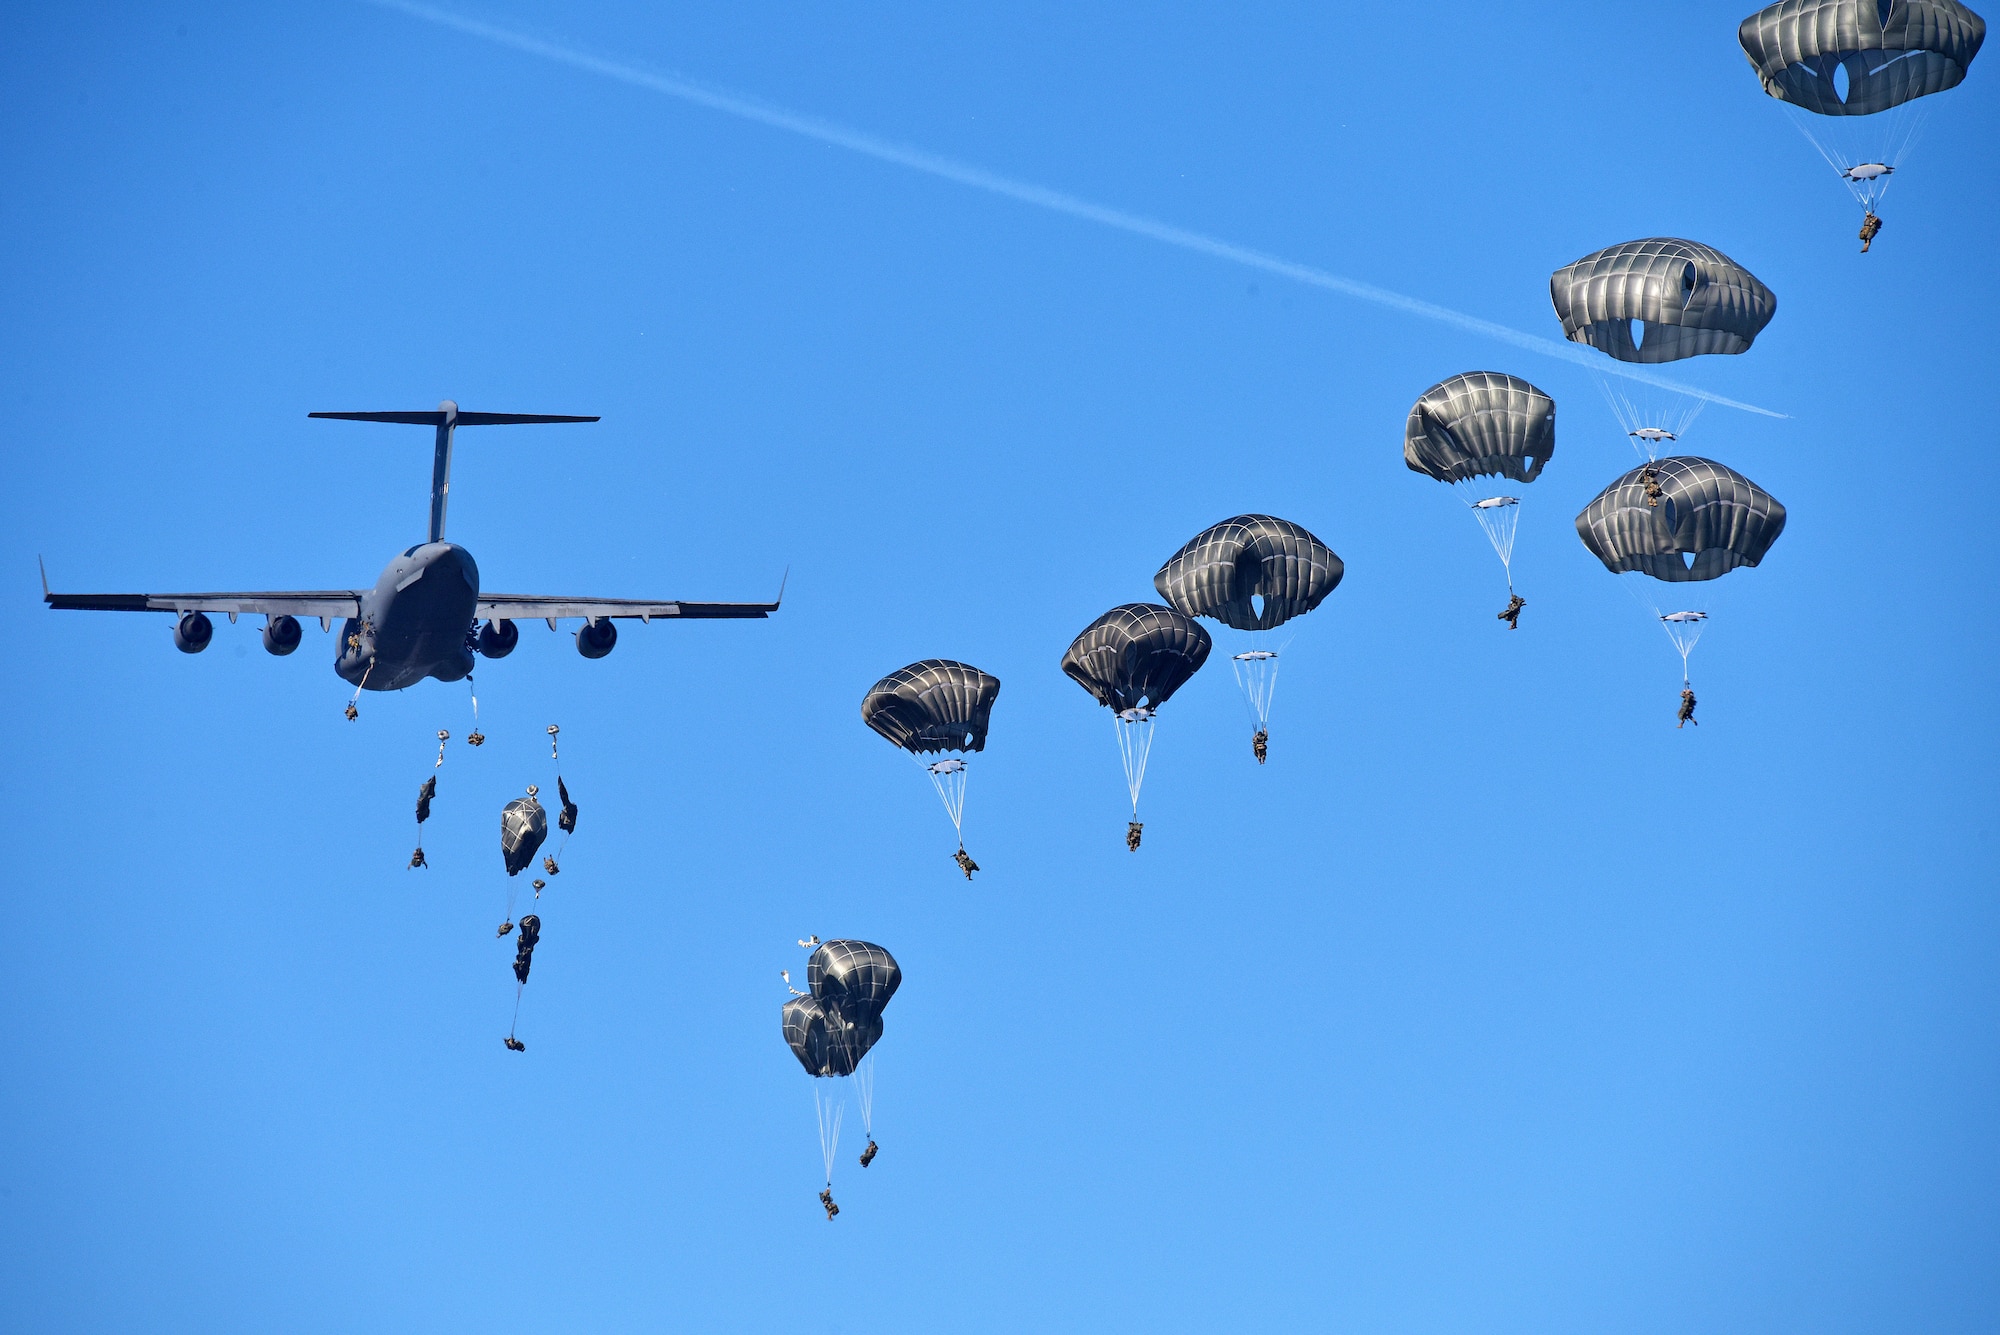 (Archive Photo) U.S. Army Paratroopers assigned to 1st Battalion, 503rd Infantry Regiment, 173rd Airborne Brigade, conduct an airborne operation from C17 Globemaster III Aircraft from Papa Air Base, Hungary, during exercise Eagle Sokol at Cerklje Drop Zone in Slovenia, Mar. 22, 2019. Exercise Eagle Sokol is a bilateral training exercise with the Slovenian Armed Forces focused on the rapid deployment and assembly of forces and team cohesion with weapon systems tactics and procedures. Exercises such as this build a foundation of teamwork and readiness between allied NATO countries. The 173rd Airborne Brigade is the U.S. Army Contingency Response Force in Europe, capable of projecting ready forces anywhere in the U.S. European, Africa or Central Commands' areas of responsibility. (U.S. Army Photos by Paolo Bovo)